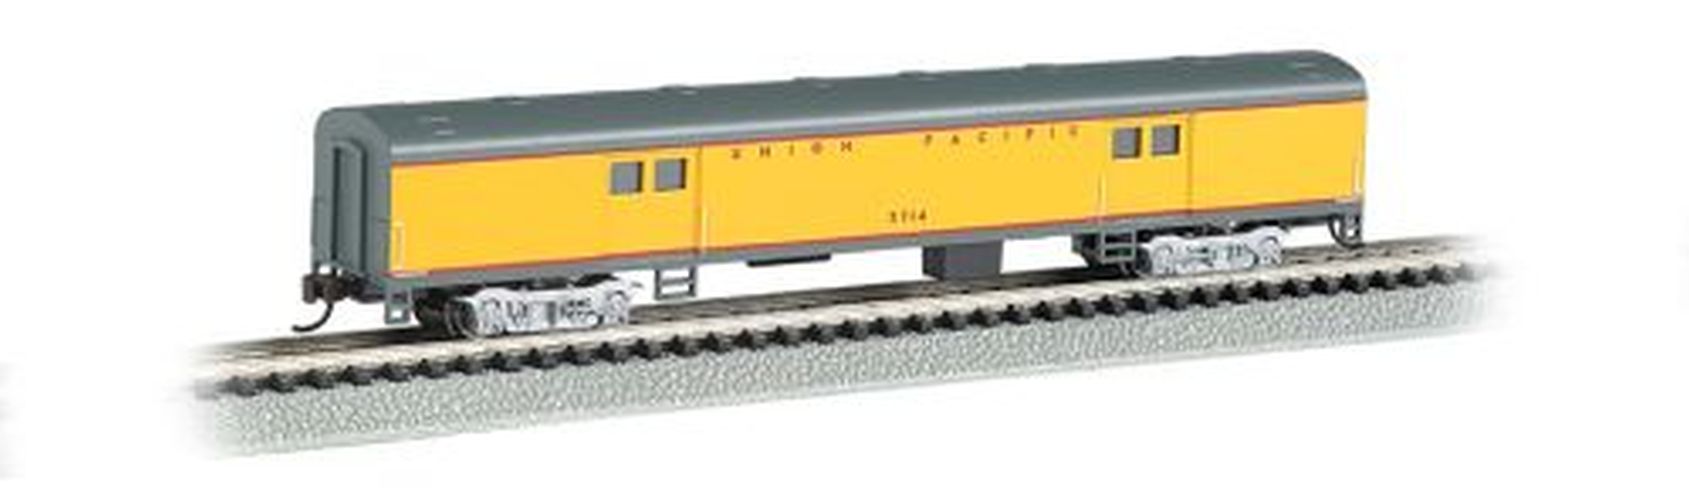 BACHMANN Union Pacific N Scale 72 Smooth Side Baggage Car - 